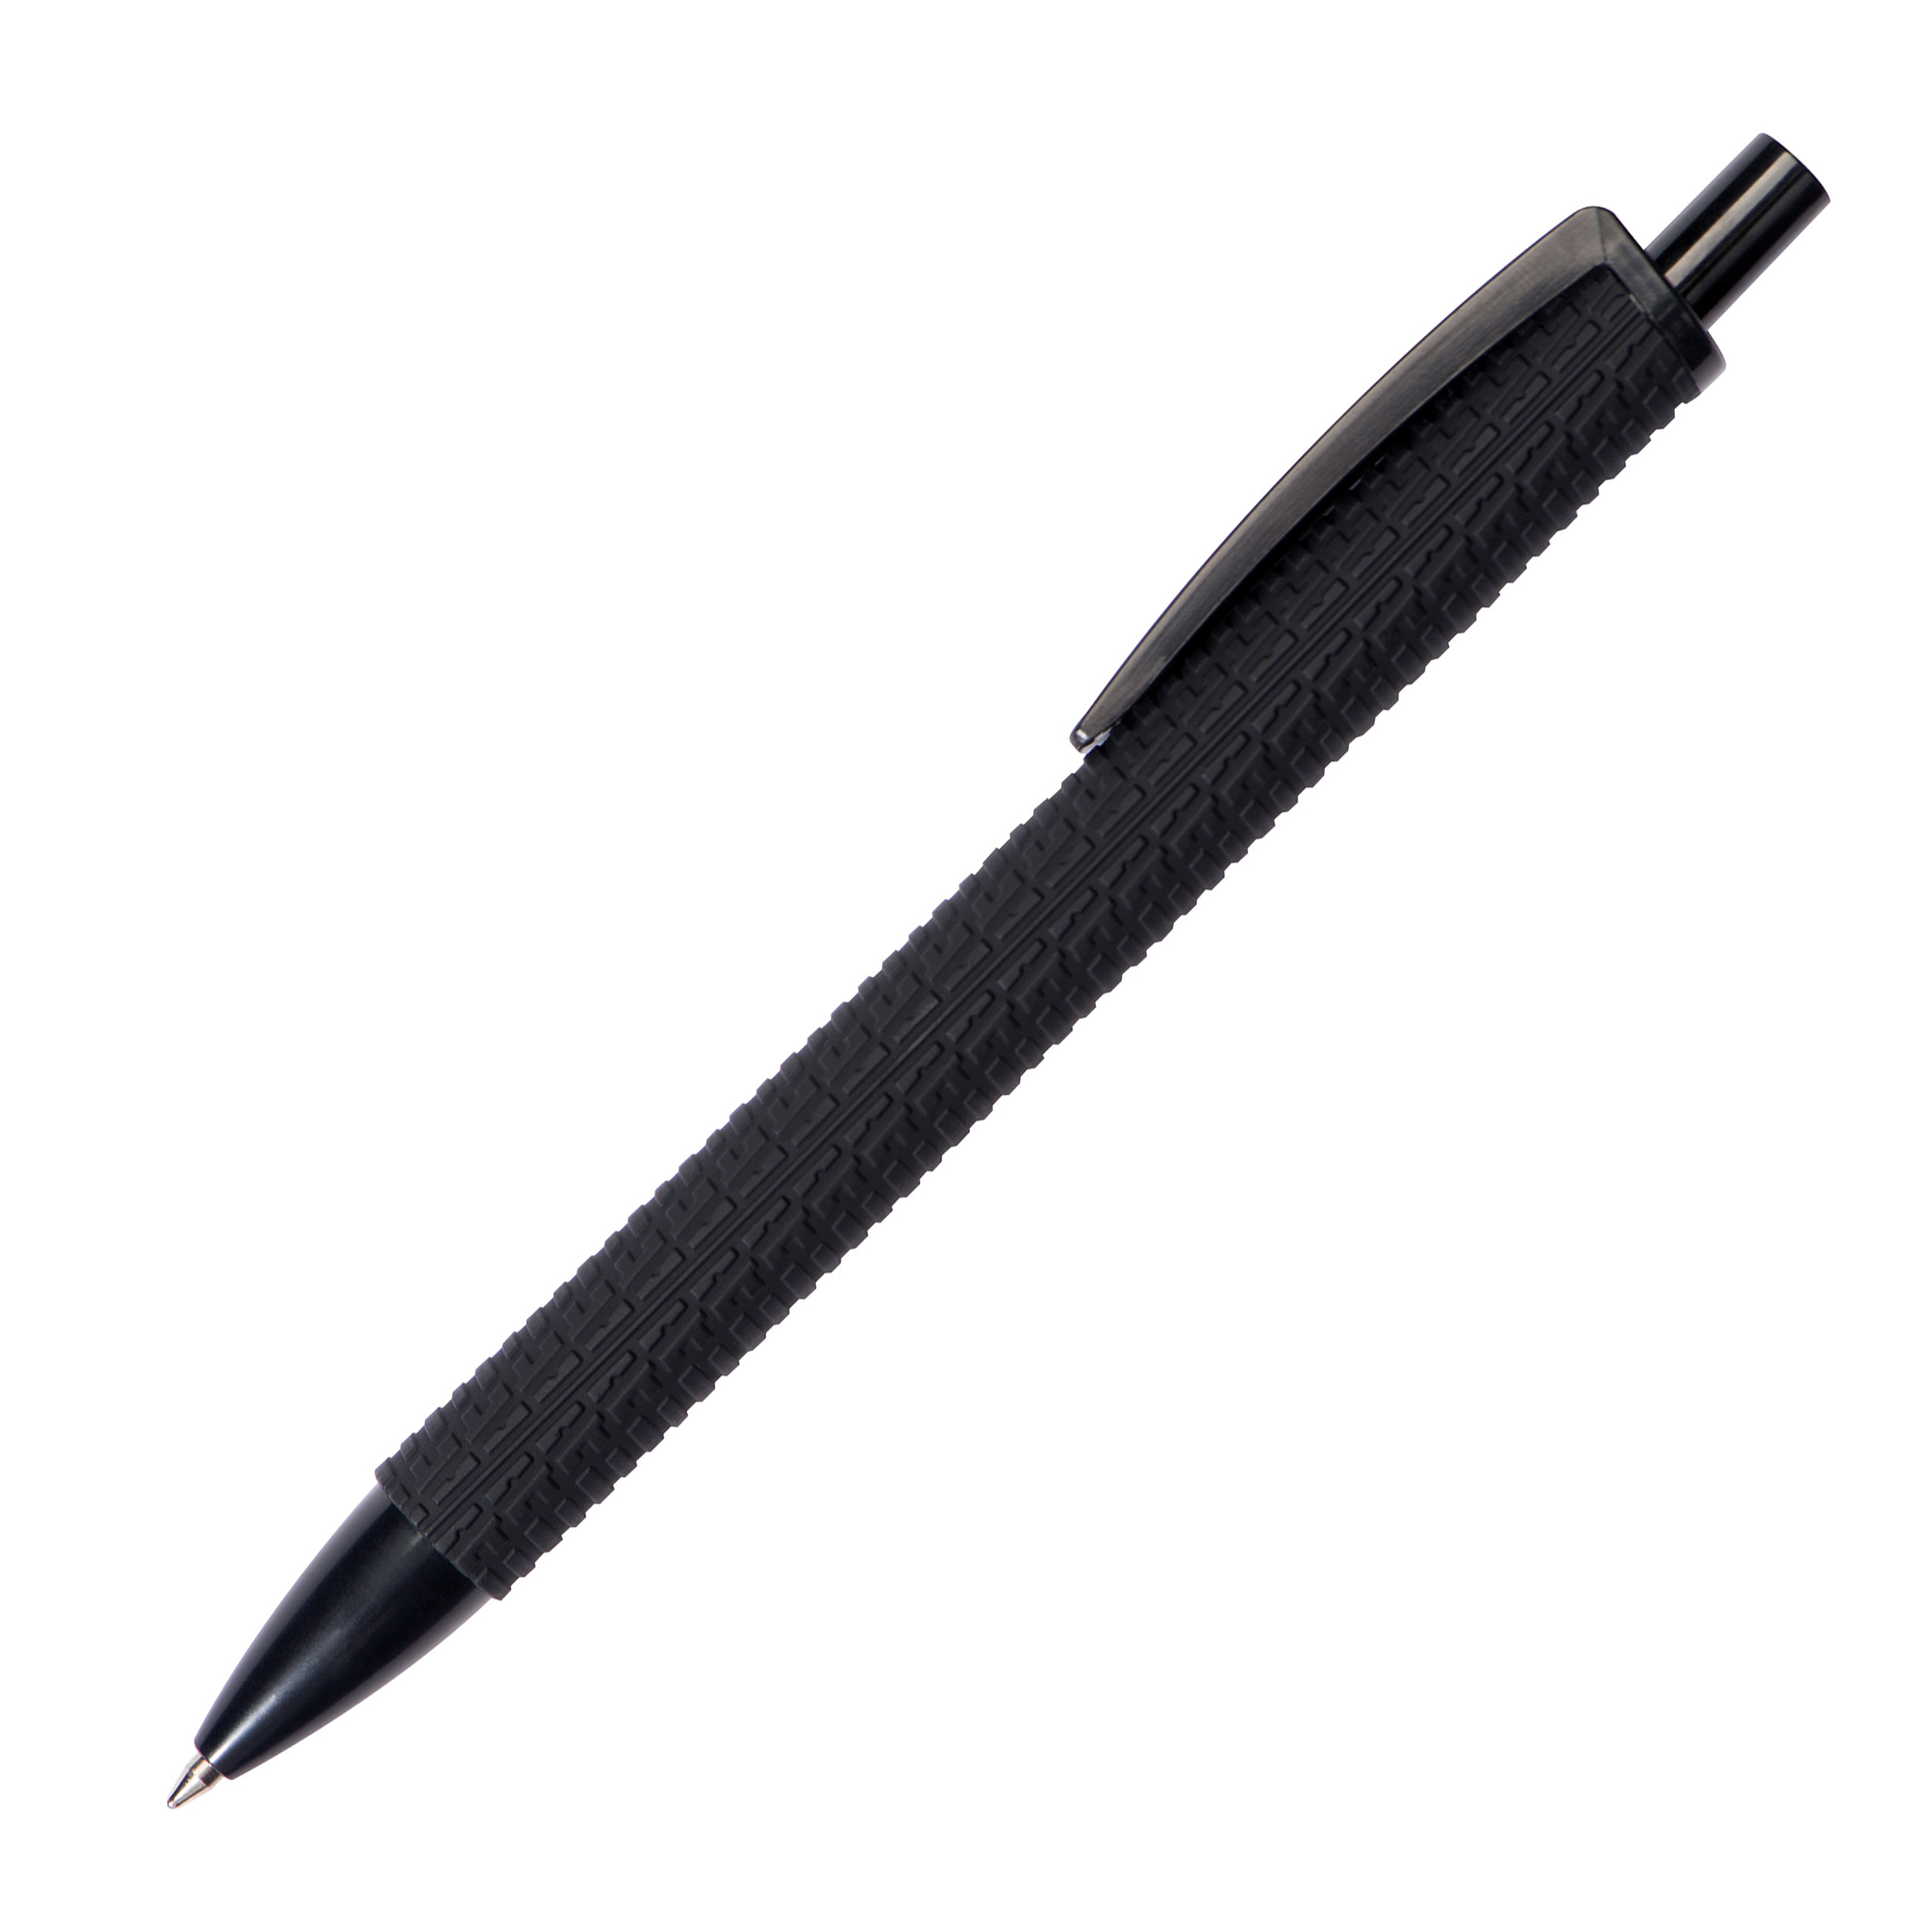 Plastic ball pen with tire patterns